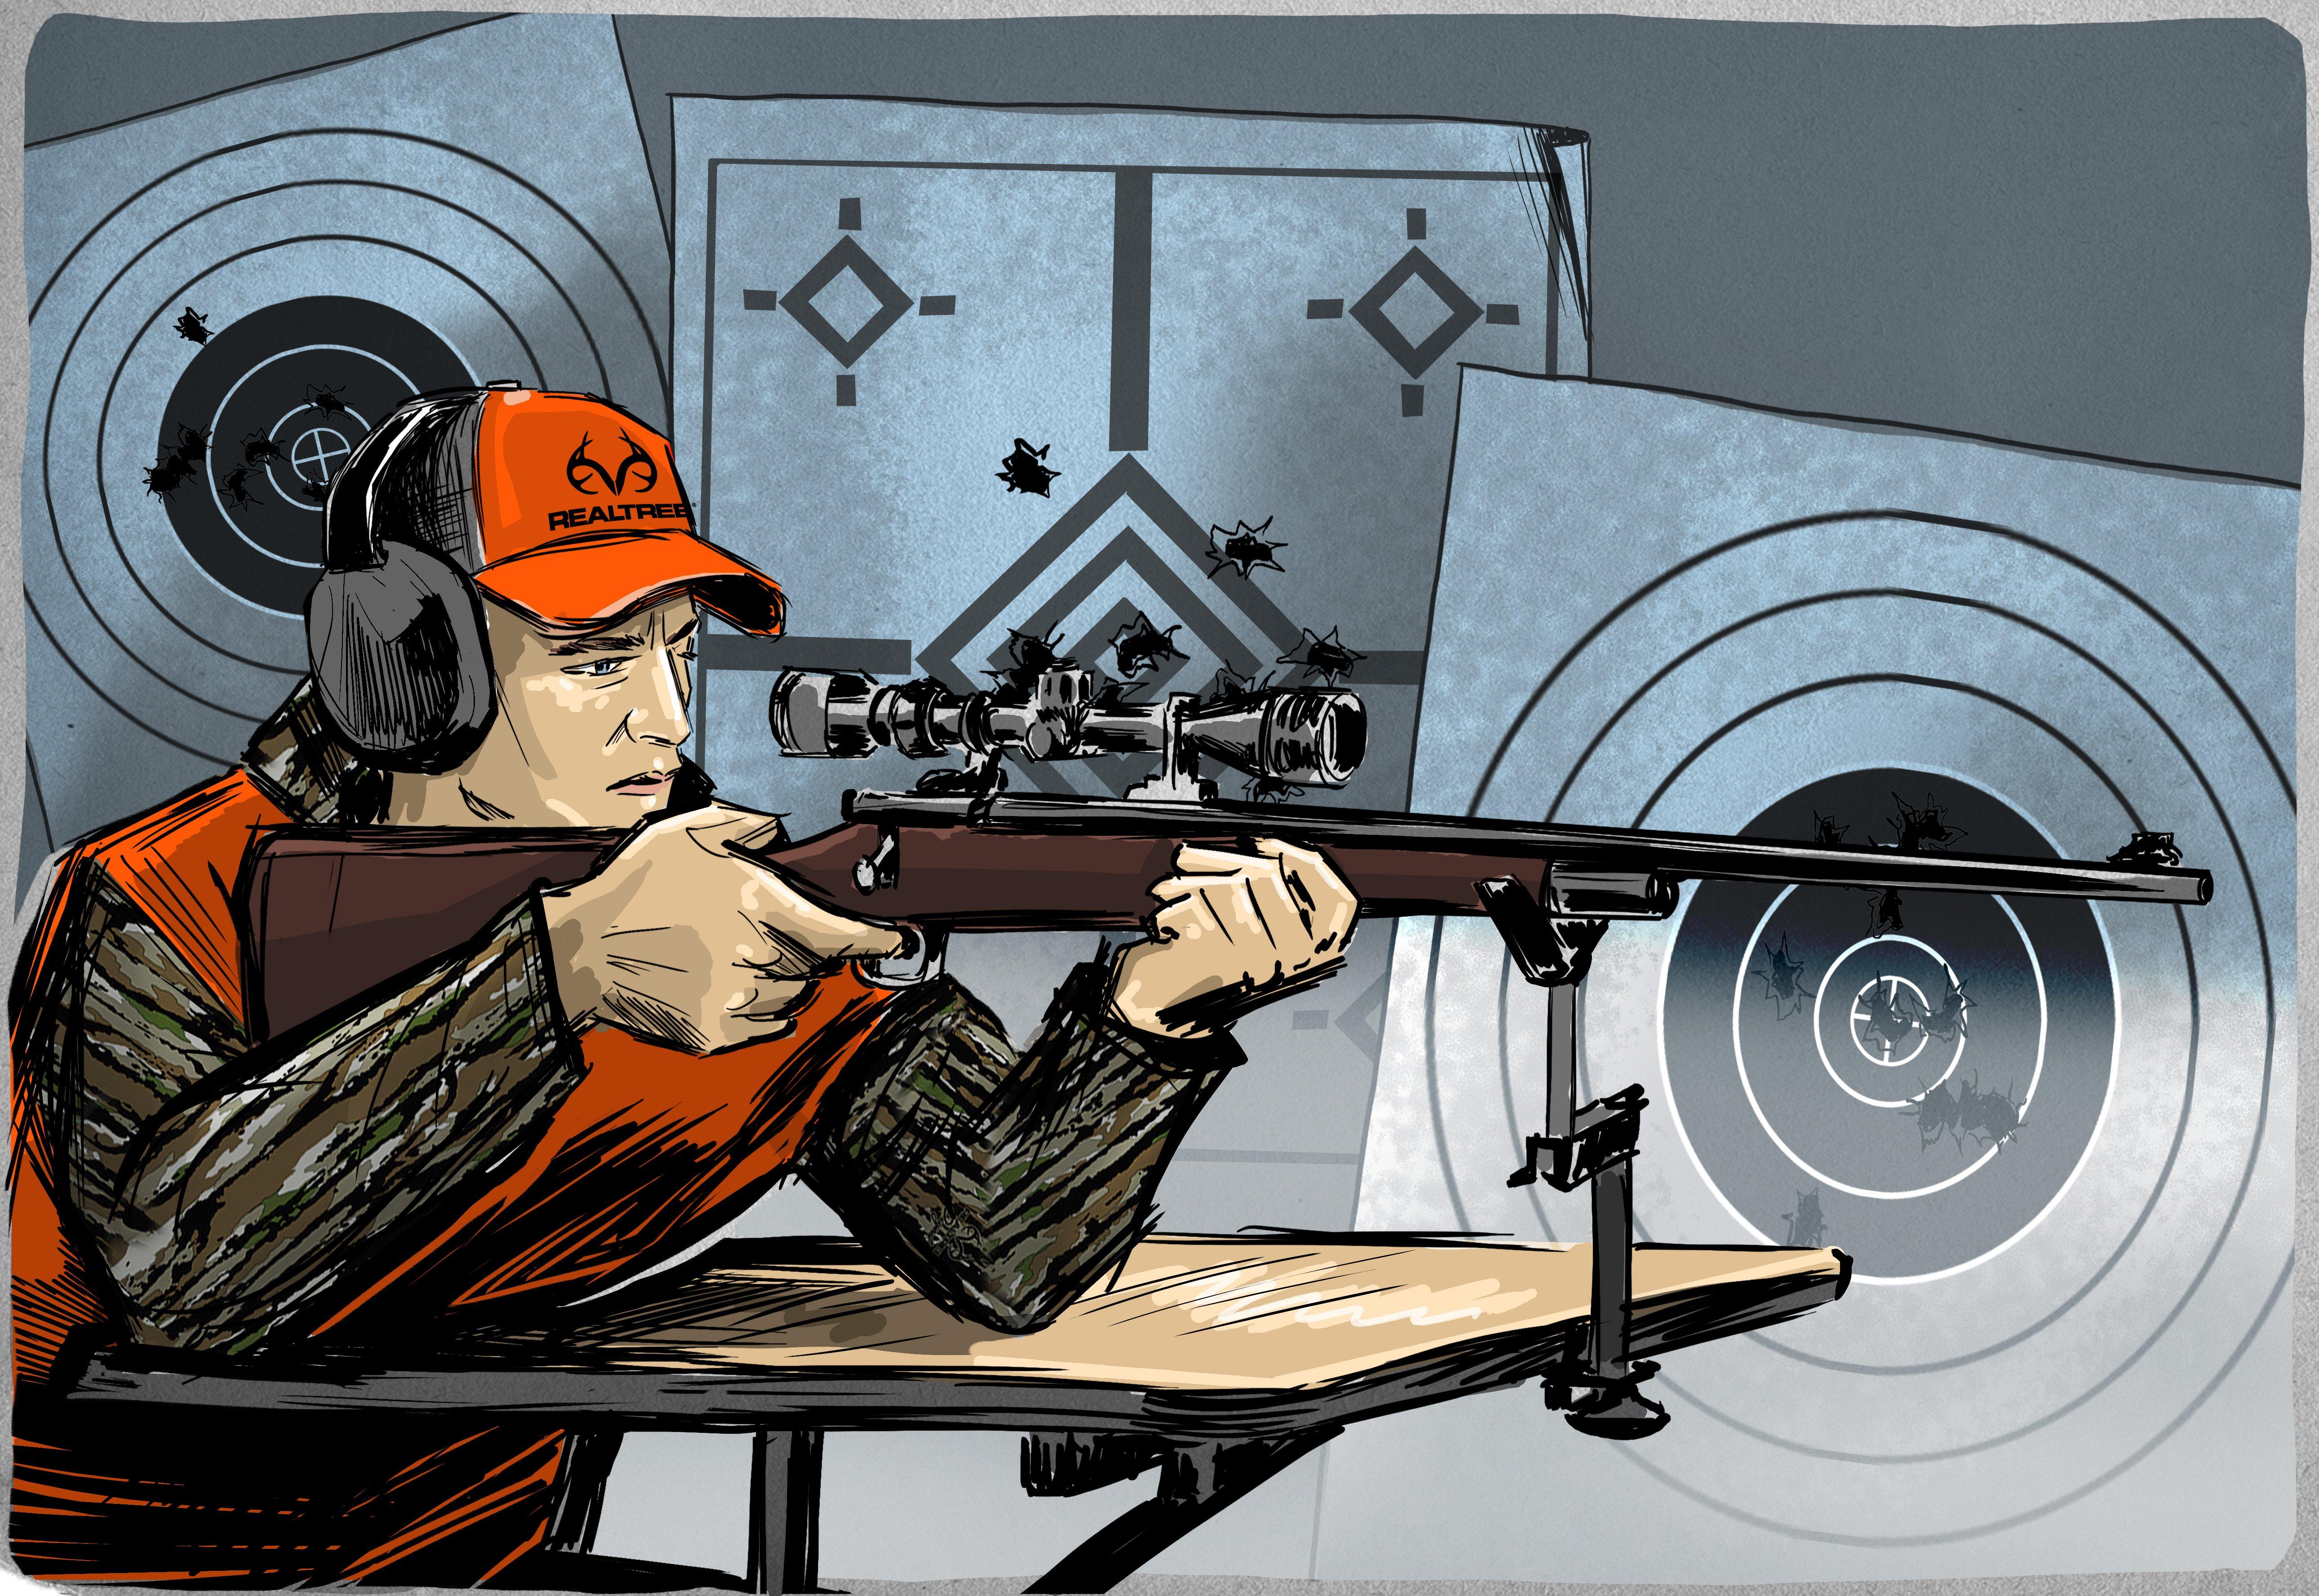 Build your own shooting range. Illustration by Ryan Orndorff